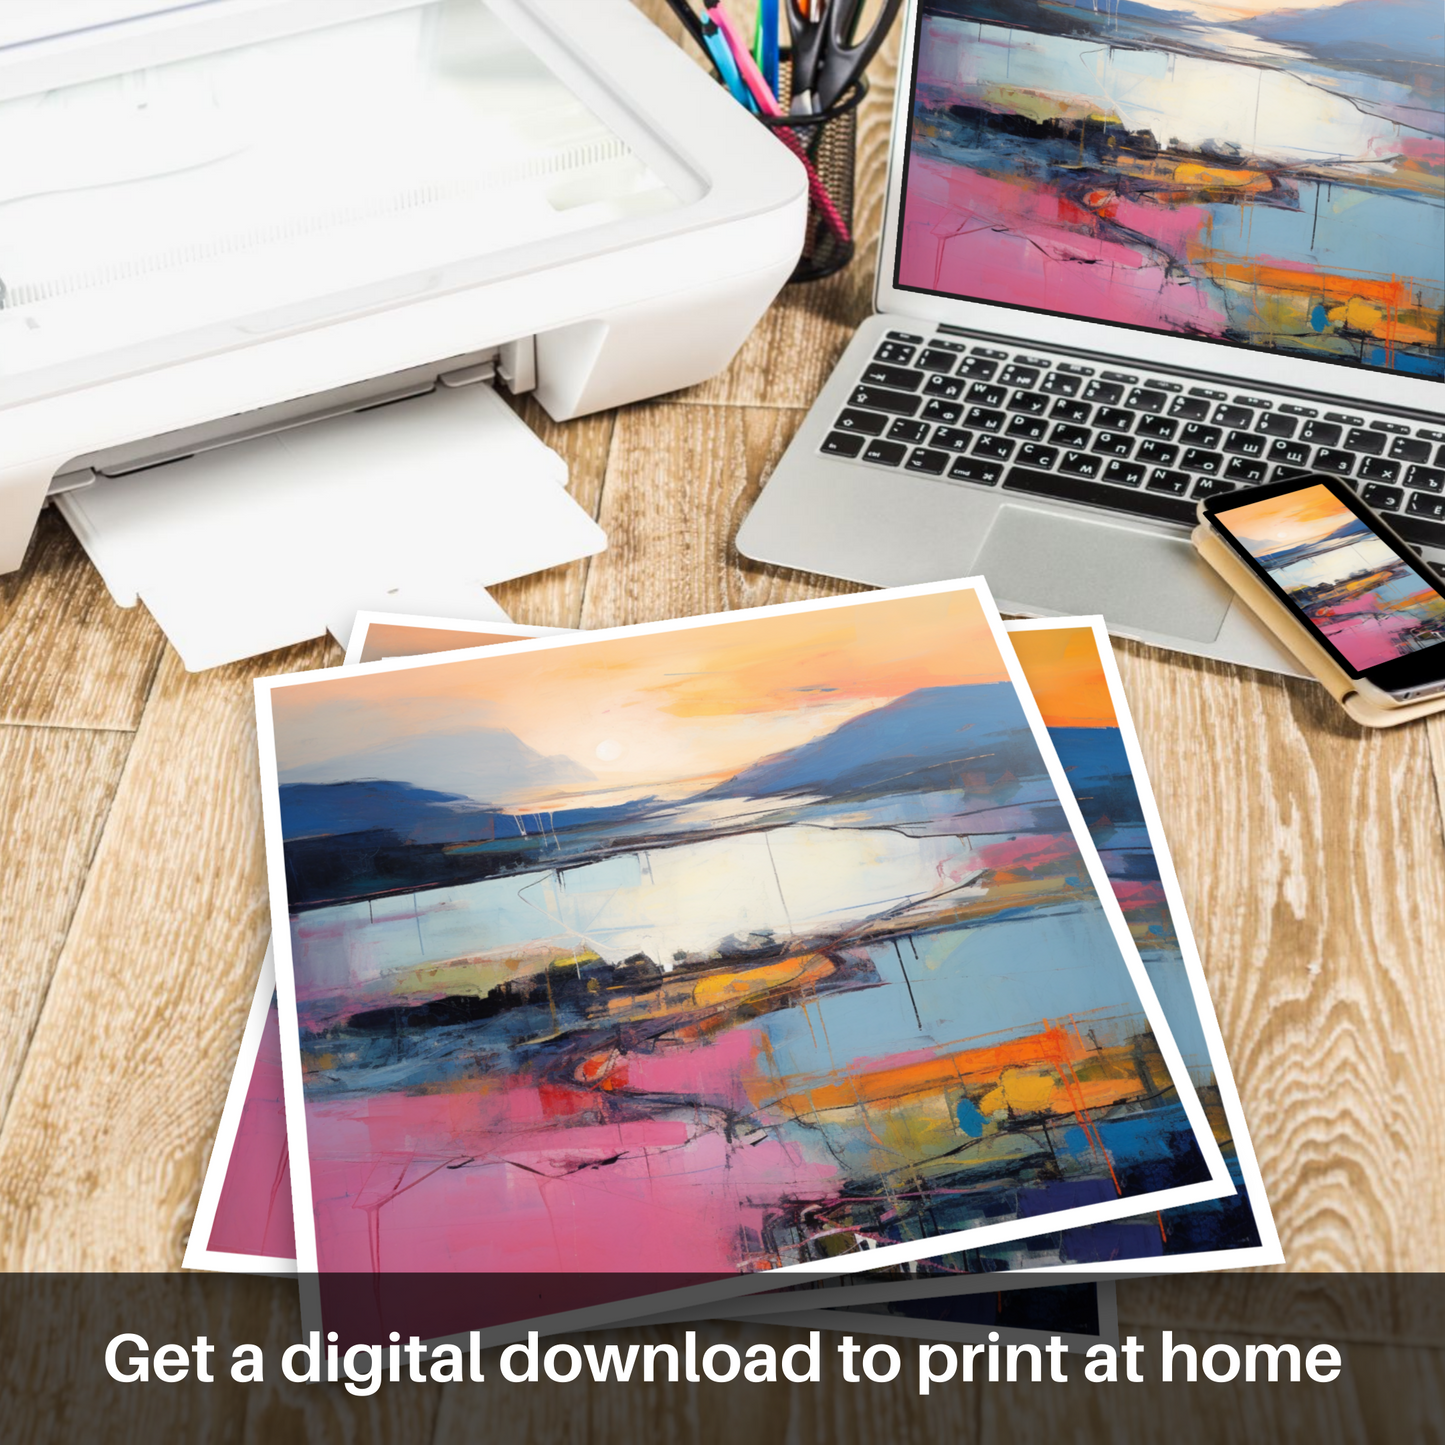 Downloadable and printable picture of Sunset over Loch Lomond